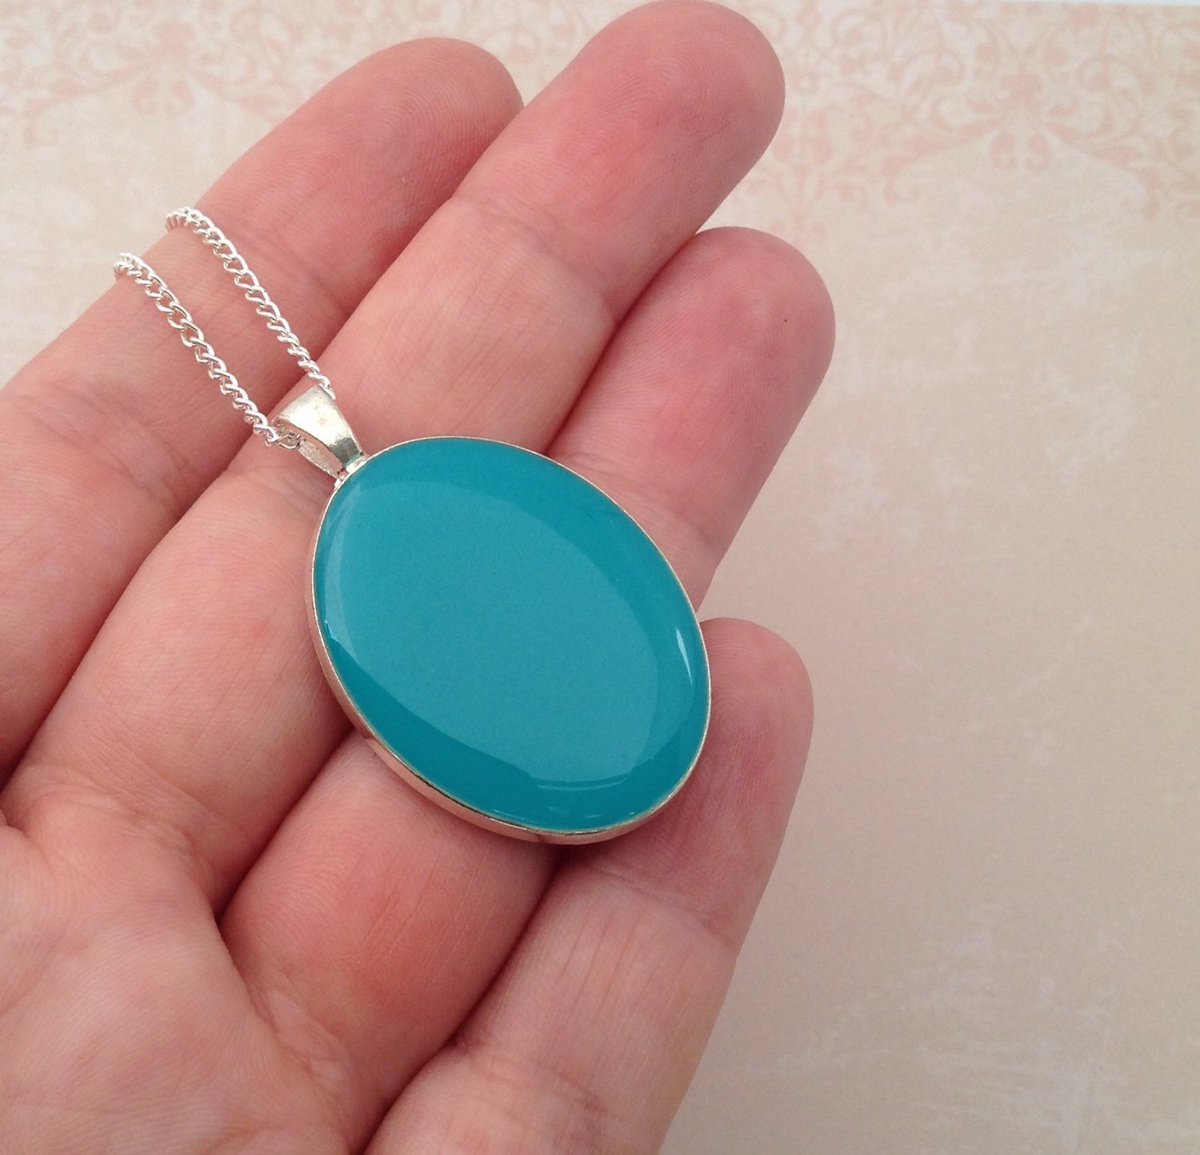 Teal Necklace, Resin Pendant, Resin Jewellery, Mother's Day Gift For Mum, Resin Necklace For Her, Token For Sister, For Birthday tuppu.net/82cb18d9 #BeadsofCreation #Etsy #TealPendant